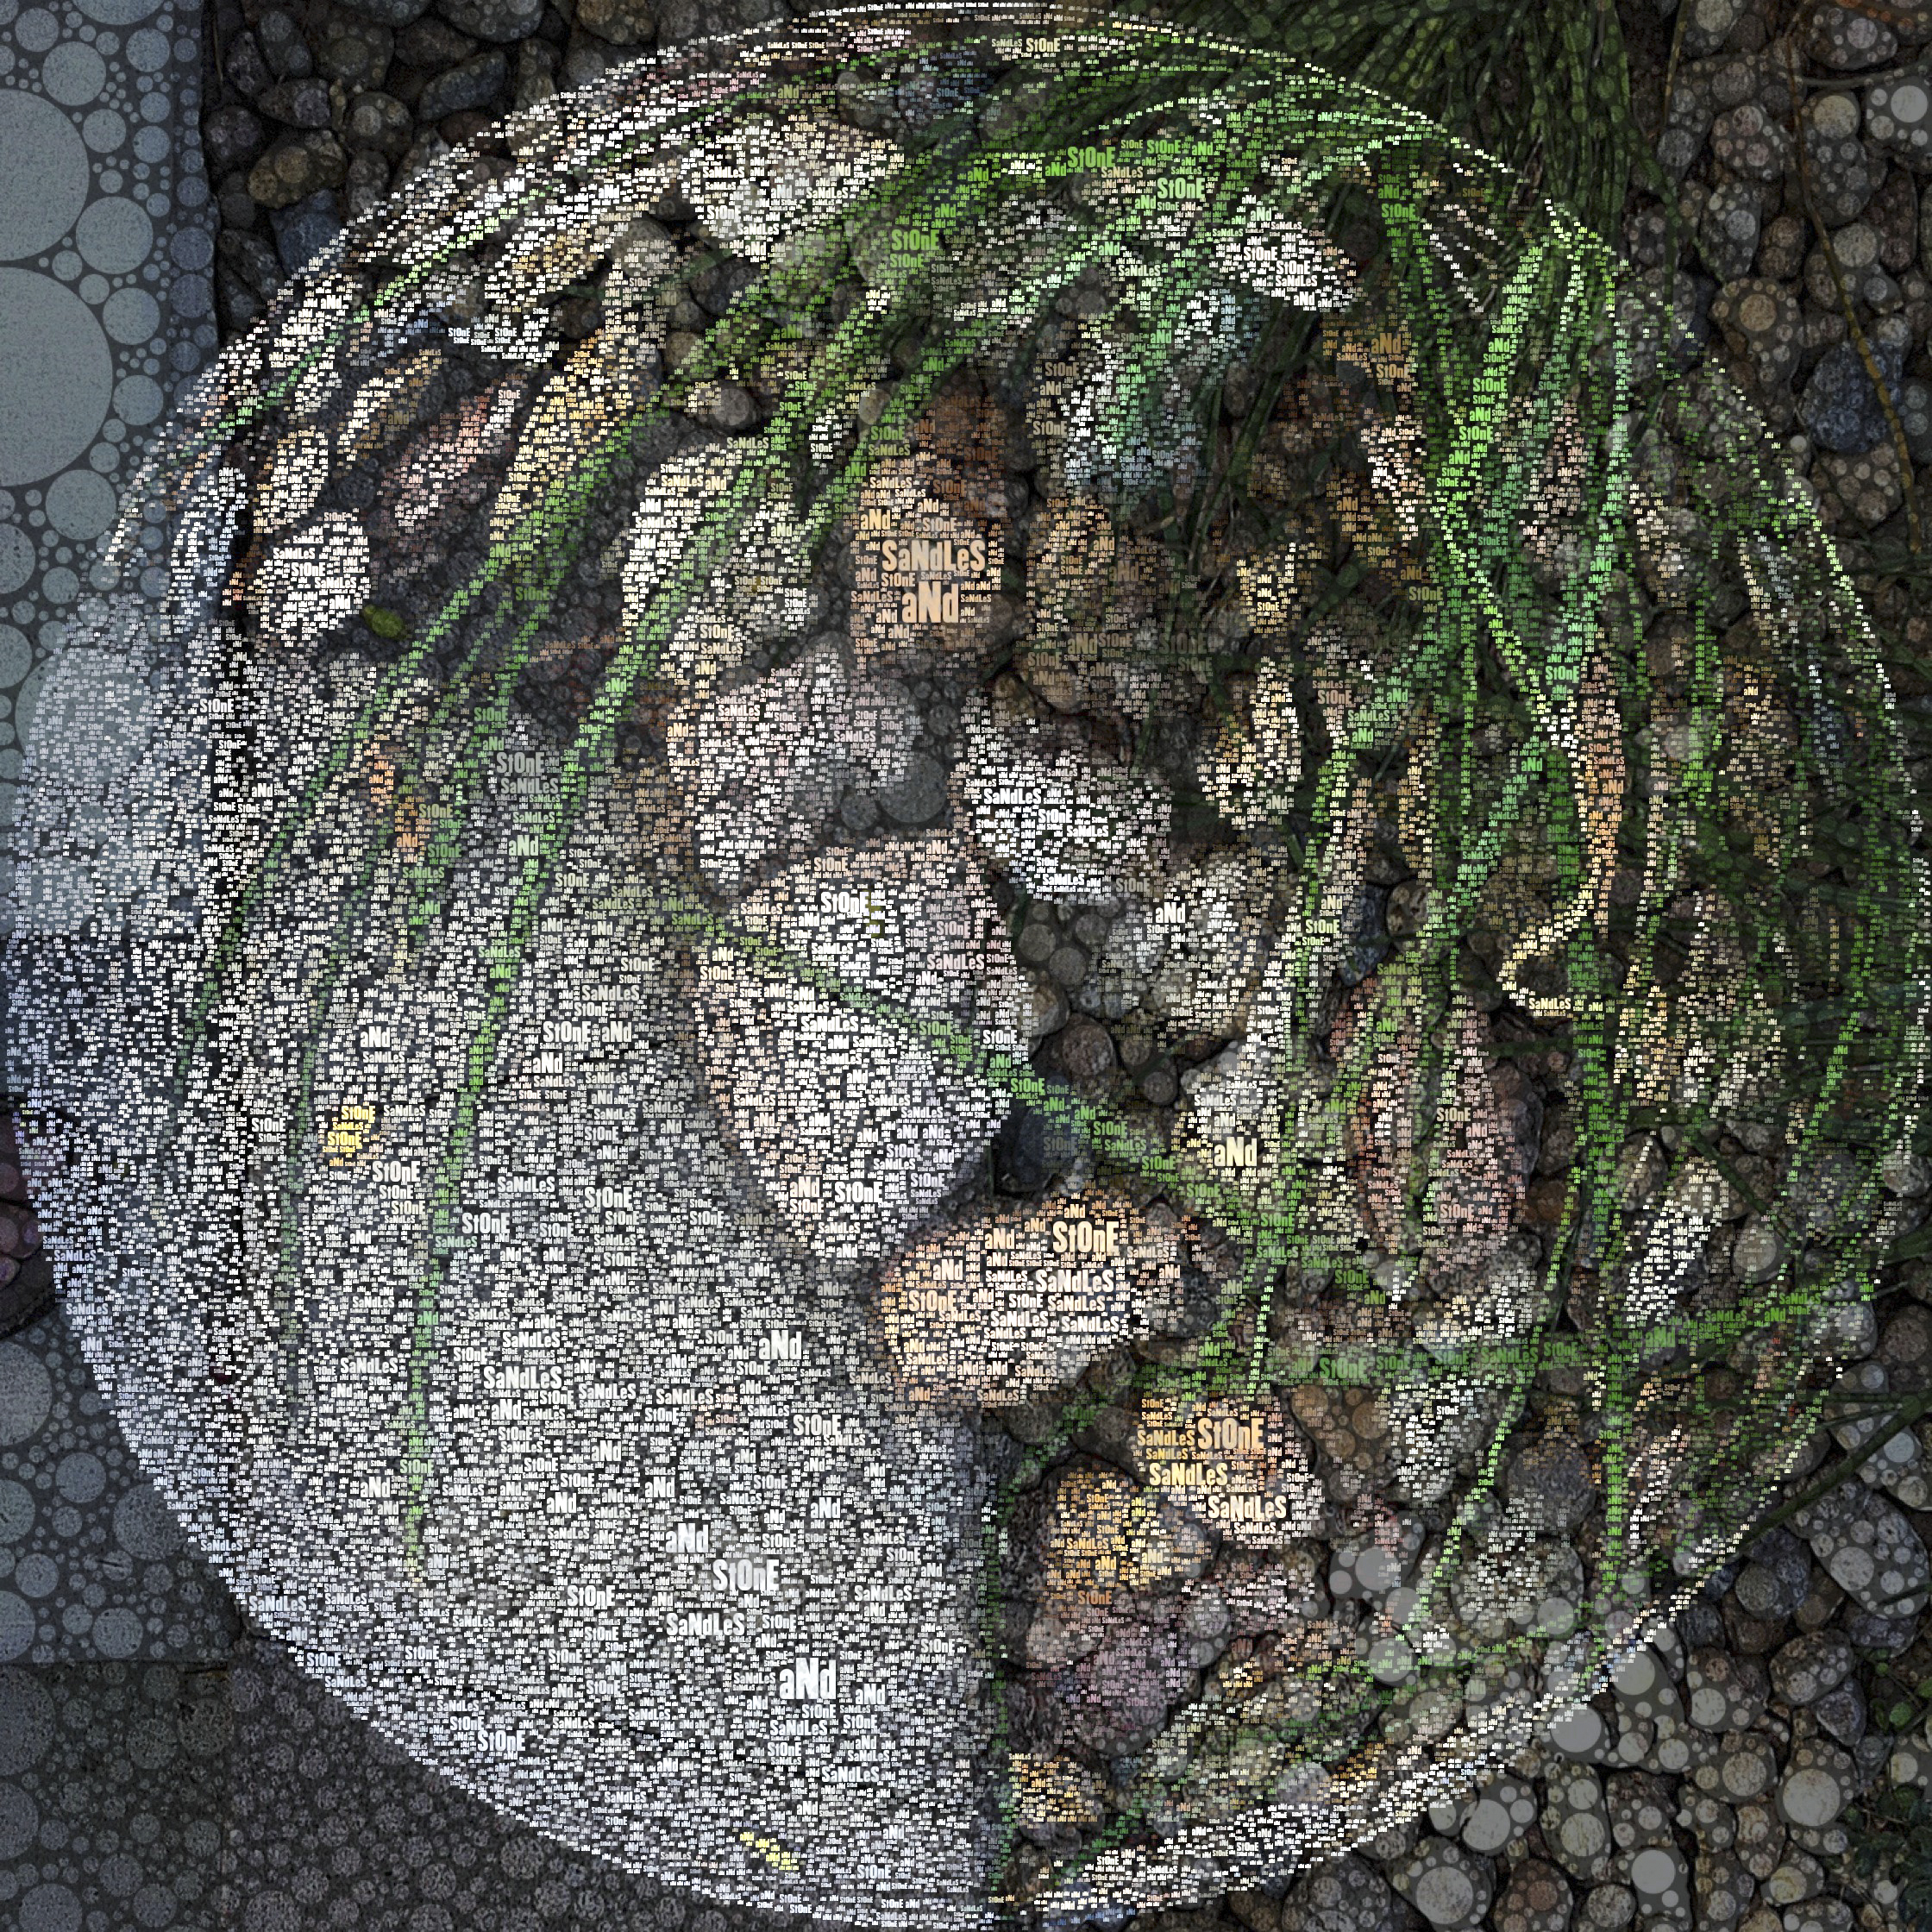 sTone aNd wEEdS